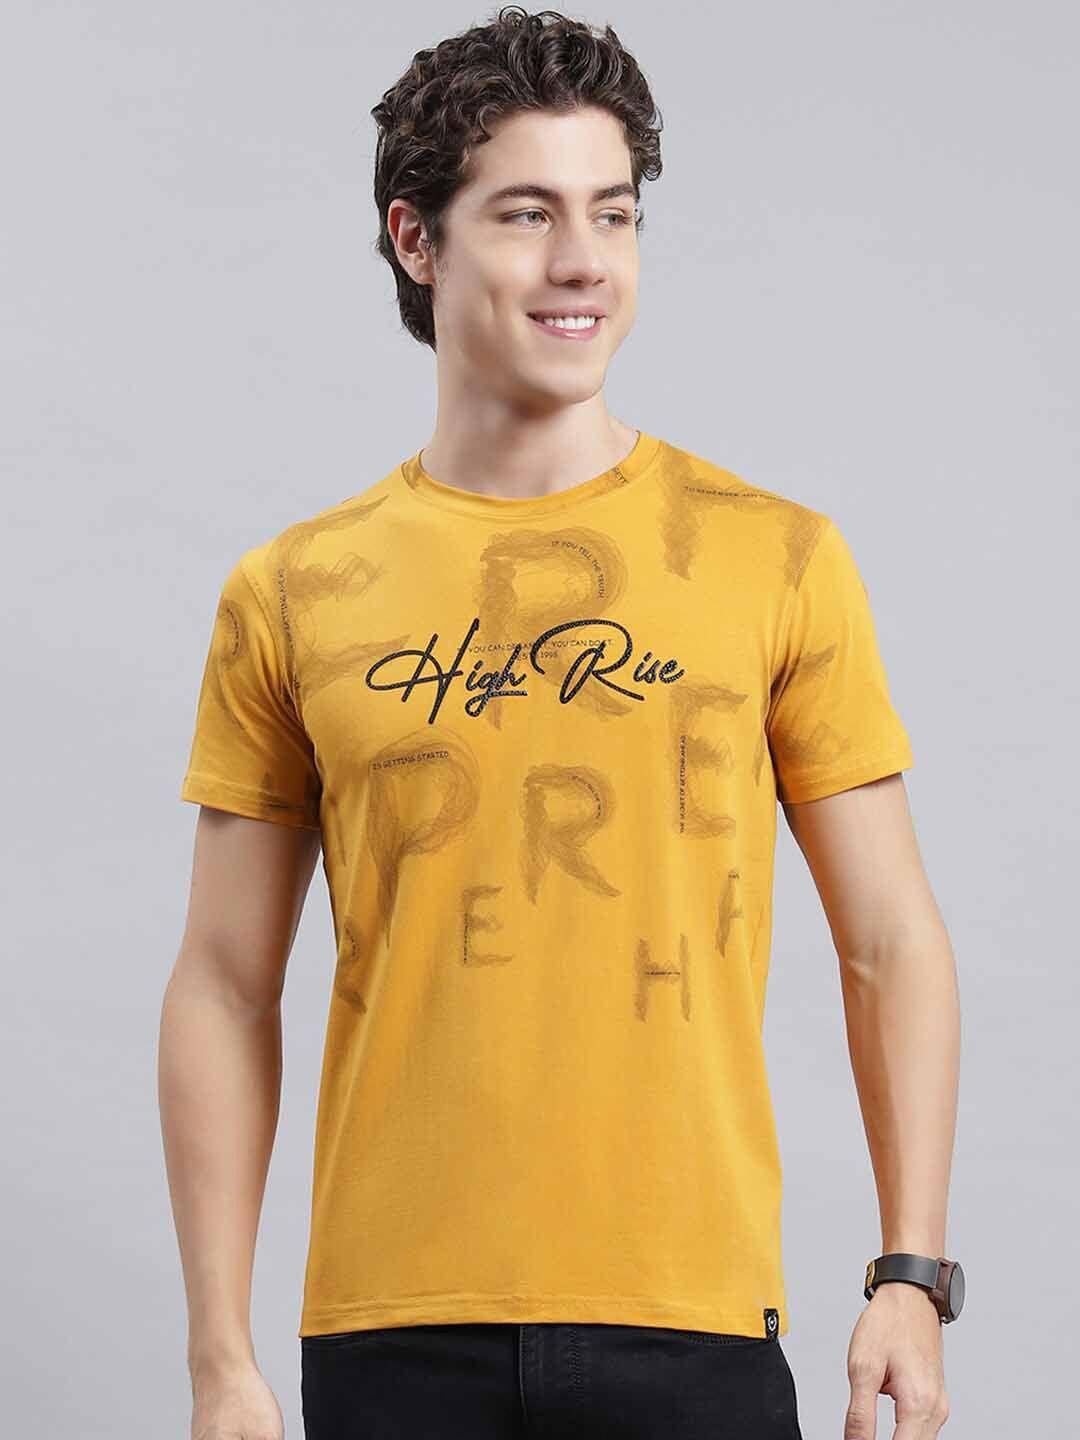 monte carlo typography printed casual t-shirt